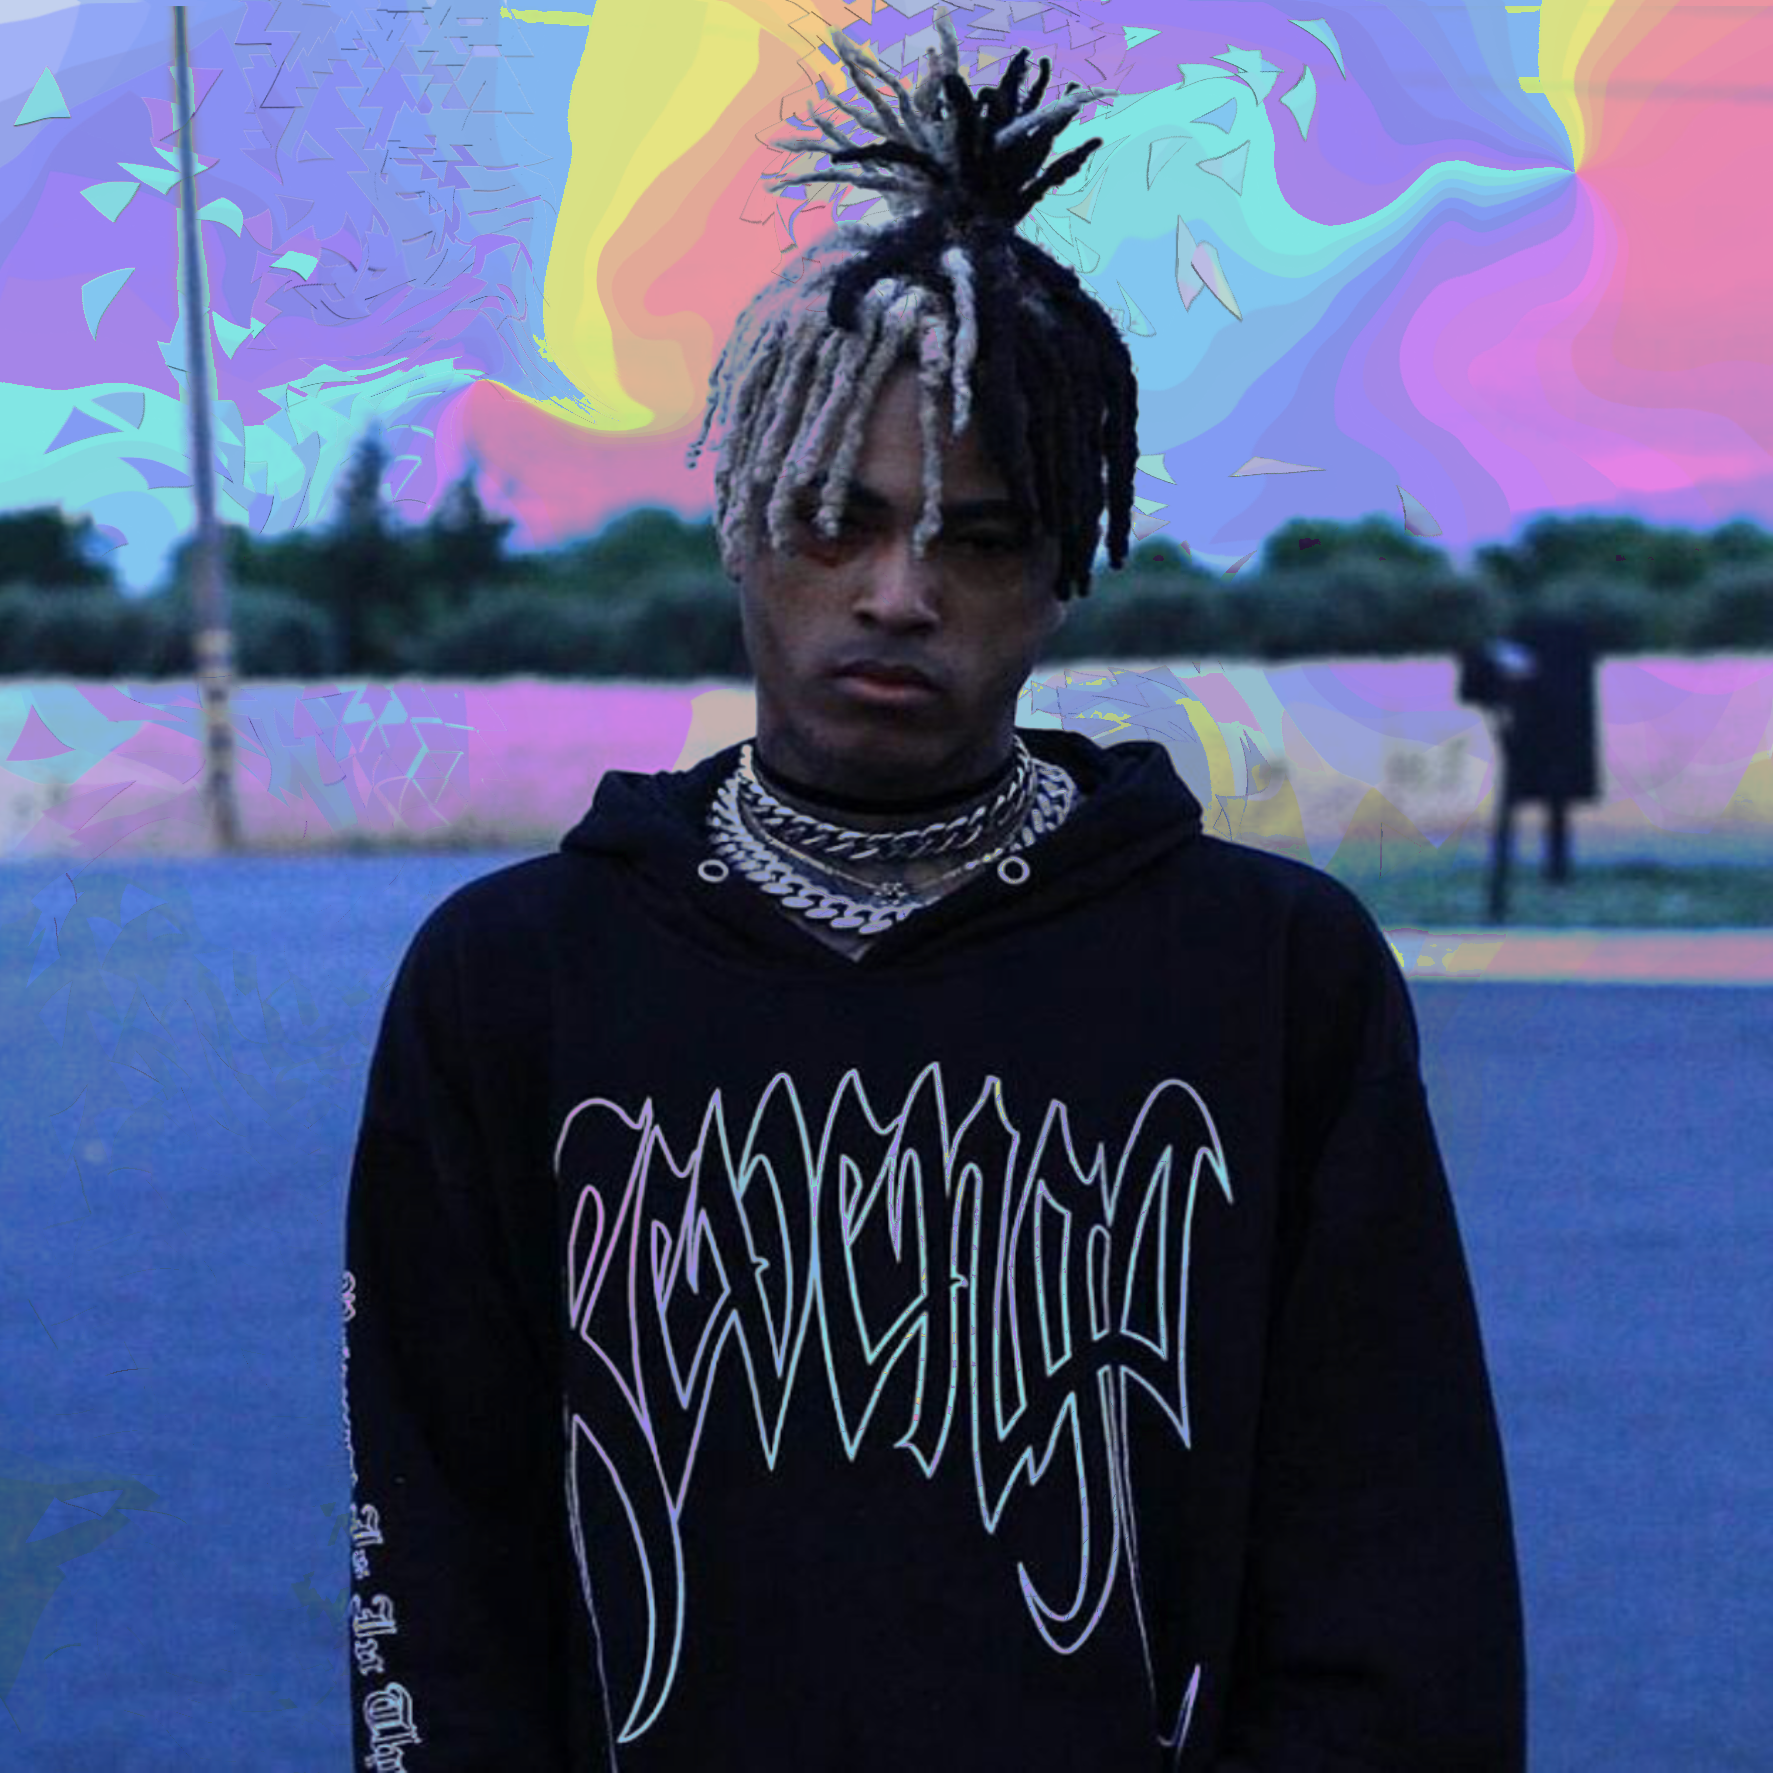 Free download freetoedit xxxtentacion Image by God [1773x1773] for your ...